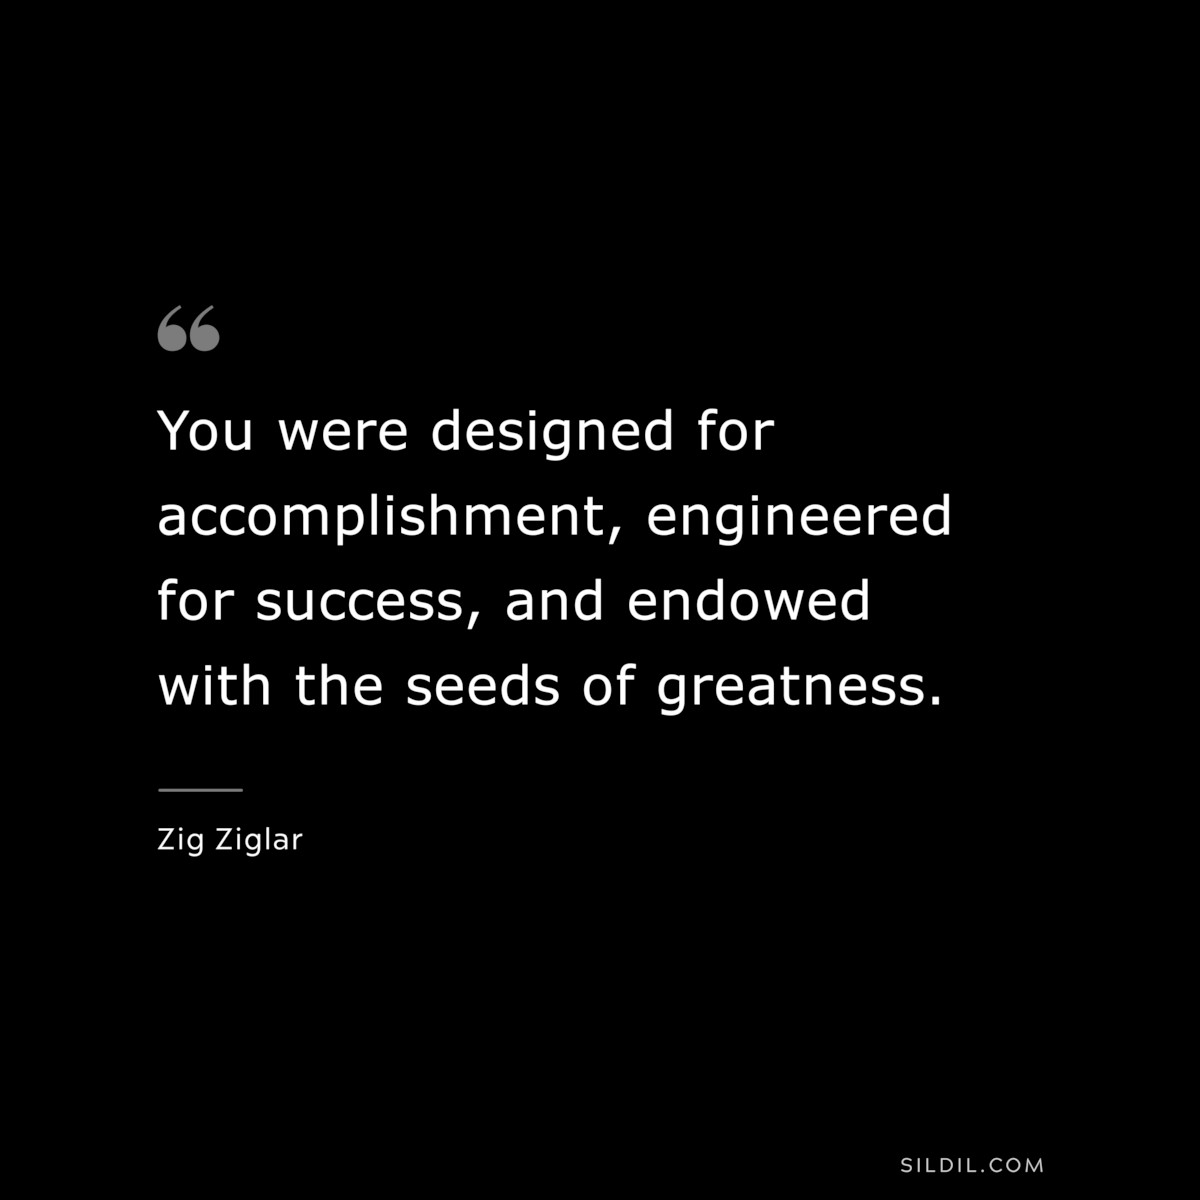 You were designed for accomplishment, engineered for success, and endowed with the seeds of greatness. ― Zig Ziglar